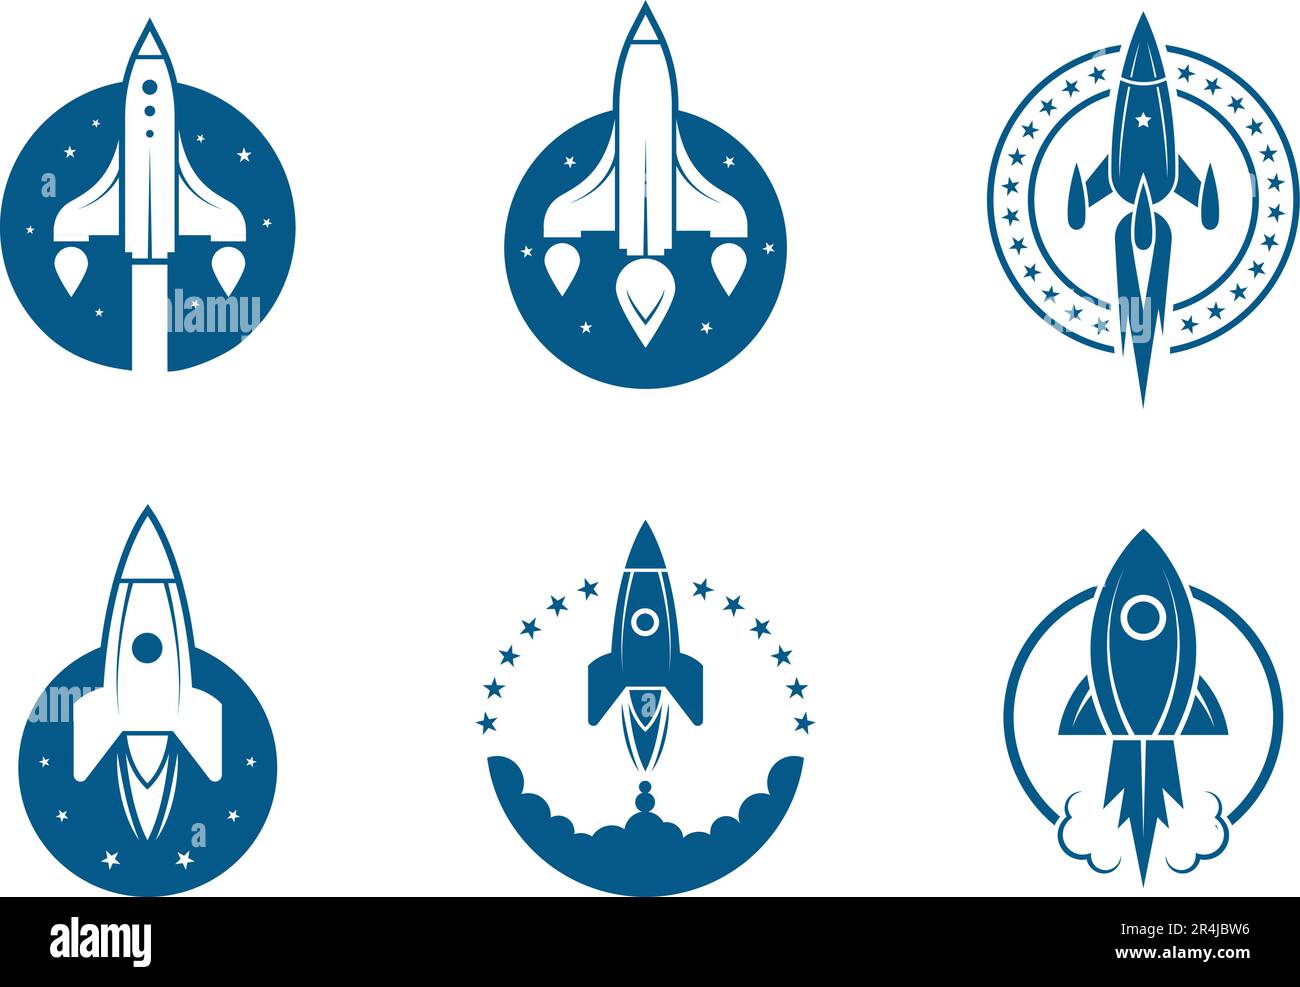 Sputnik icons. Rockets speed blue emblem items, spacecraft symbols, spaceship silhouettes, space ships graphics Stock Vector